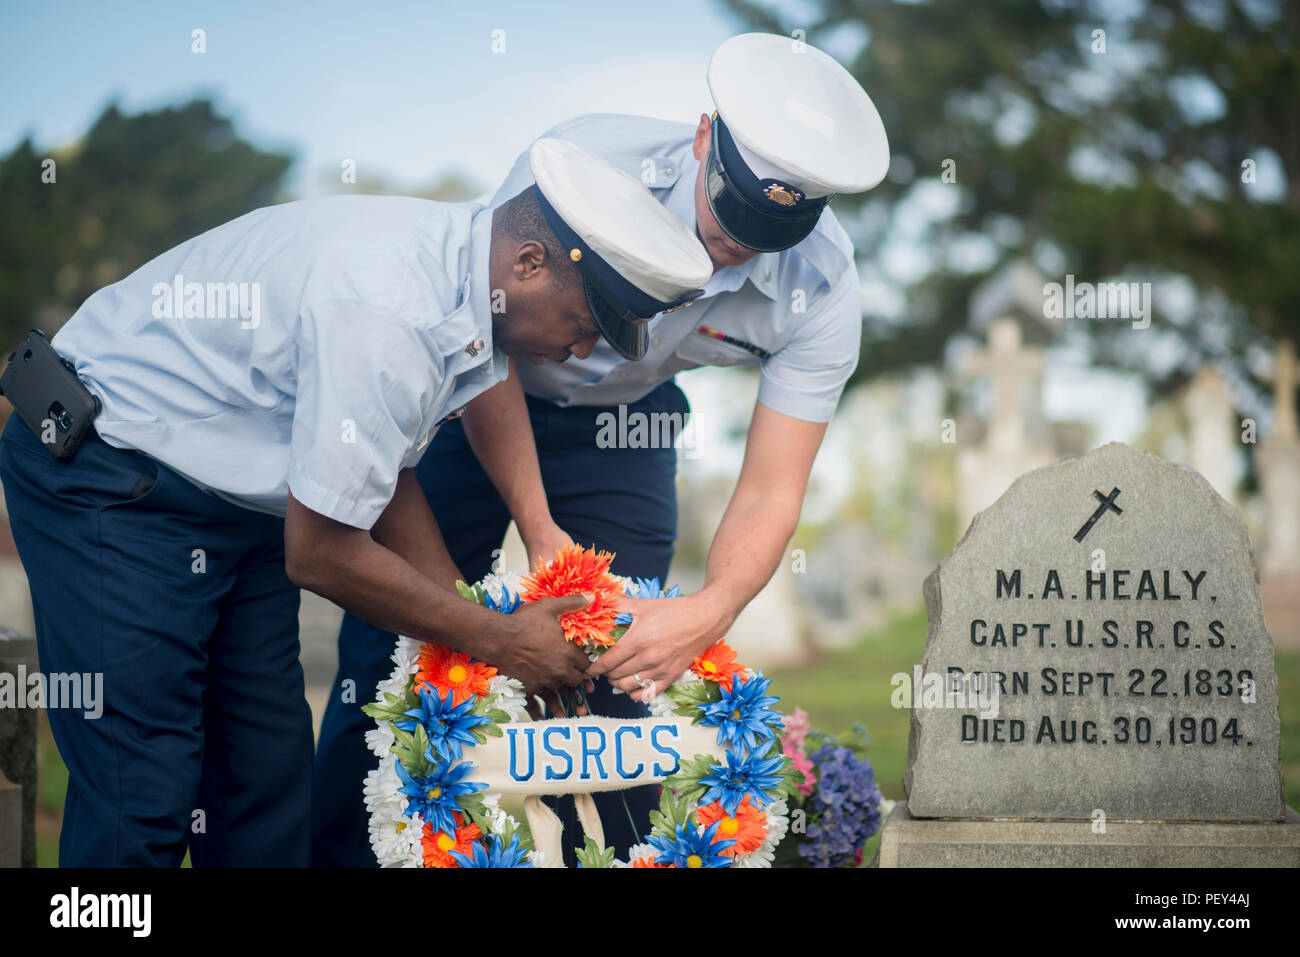 Petty Officer 1st Class Sheldon Williams and Petty Officer 3rd Class Jerry Jones lay a flowered wreath on Capt. Michael Healy's grave in Colma, Calif., Feb. 18, 2016. This observation for Healy's life was in part of District Eleven's Black History Month theme, Hallowed Grounds. (U.S. Coast Guard photo by Petty Officer 3rd Class Adam Stanton) Stock Photo